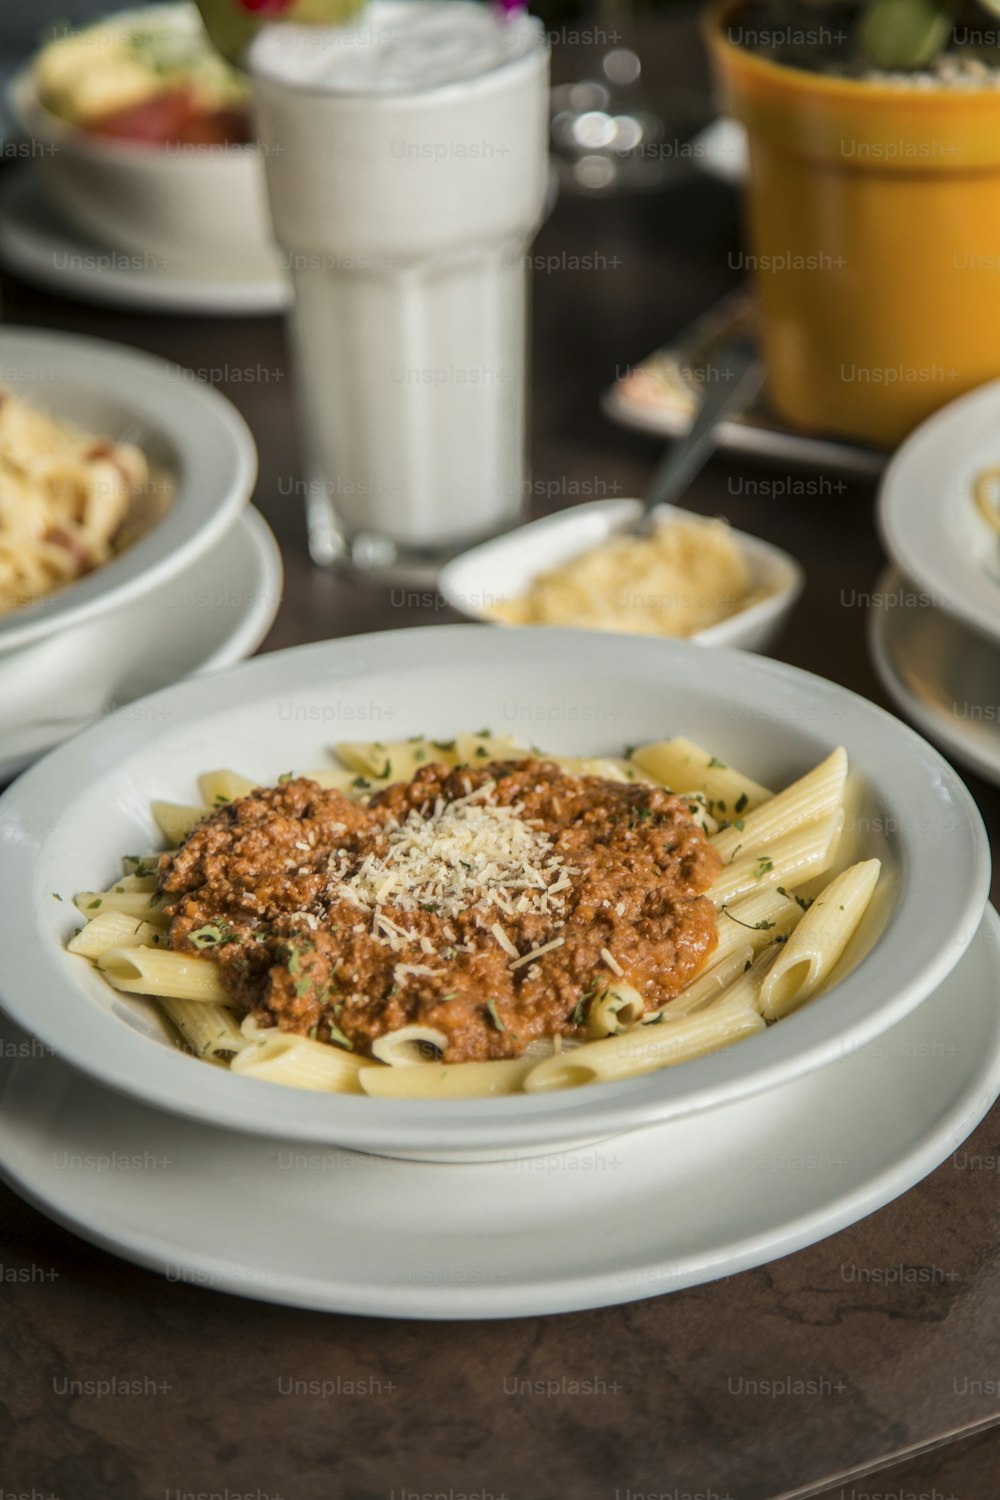 a plate of pasta with sauce and parmesan cheese